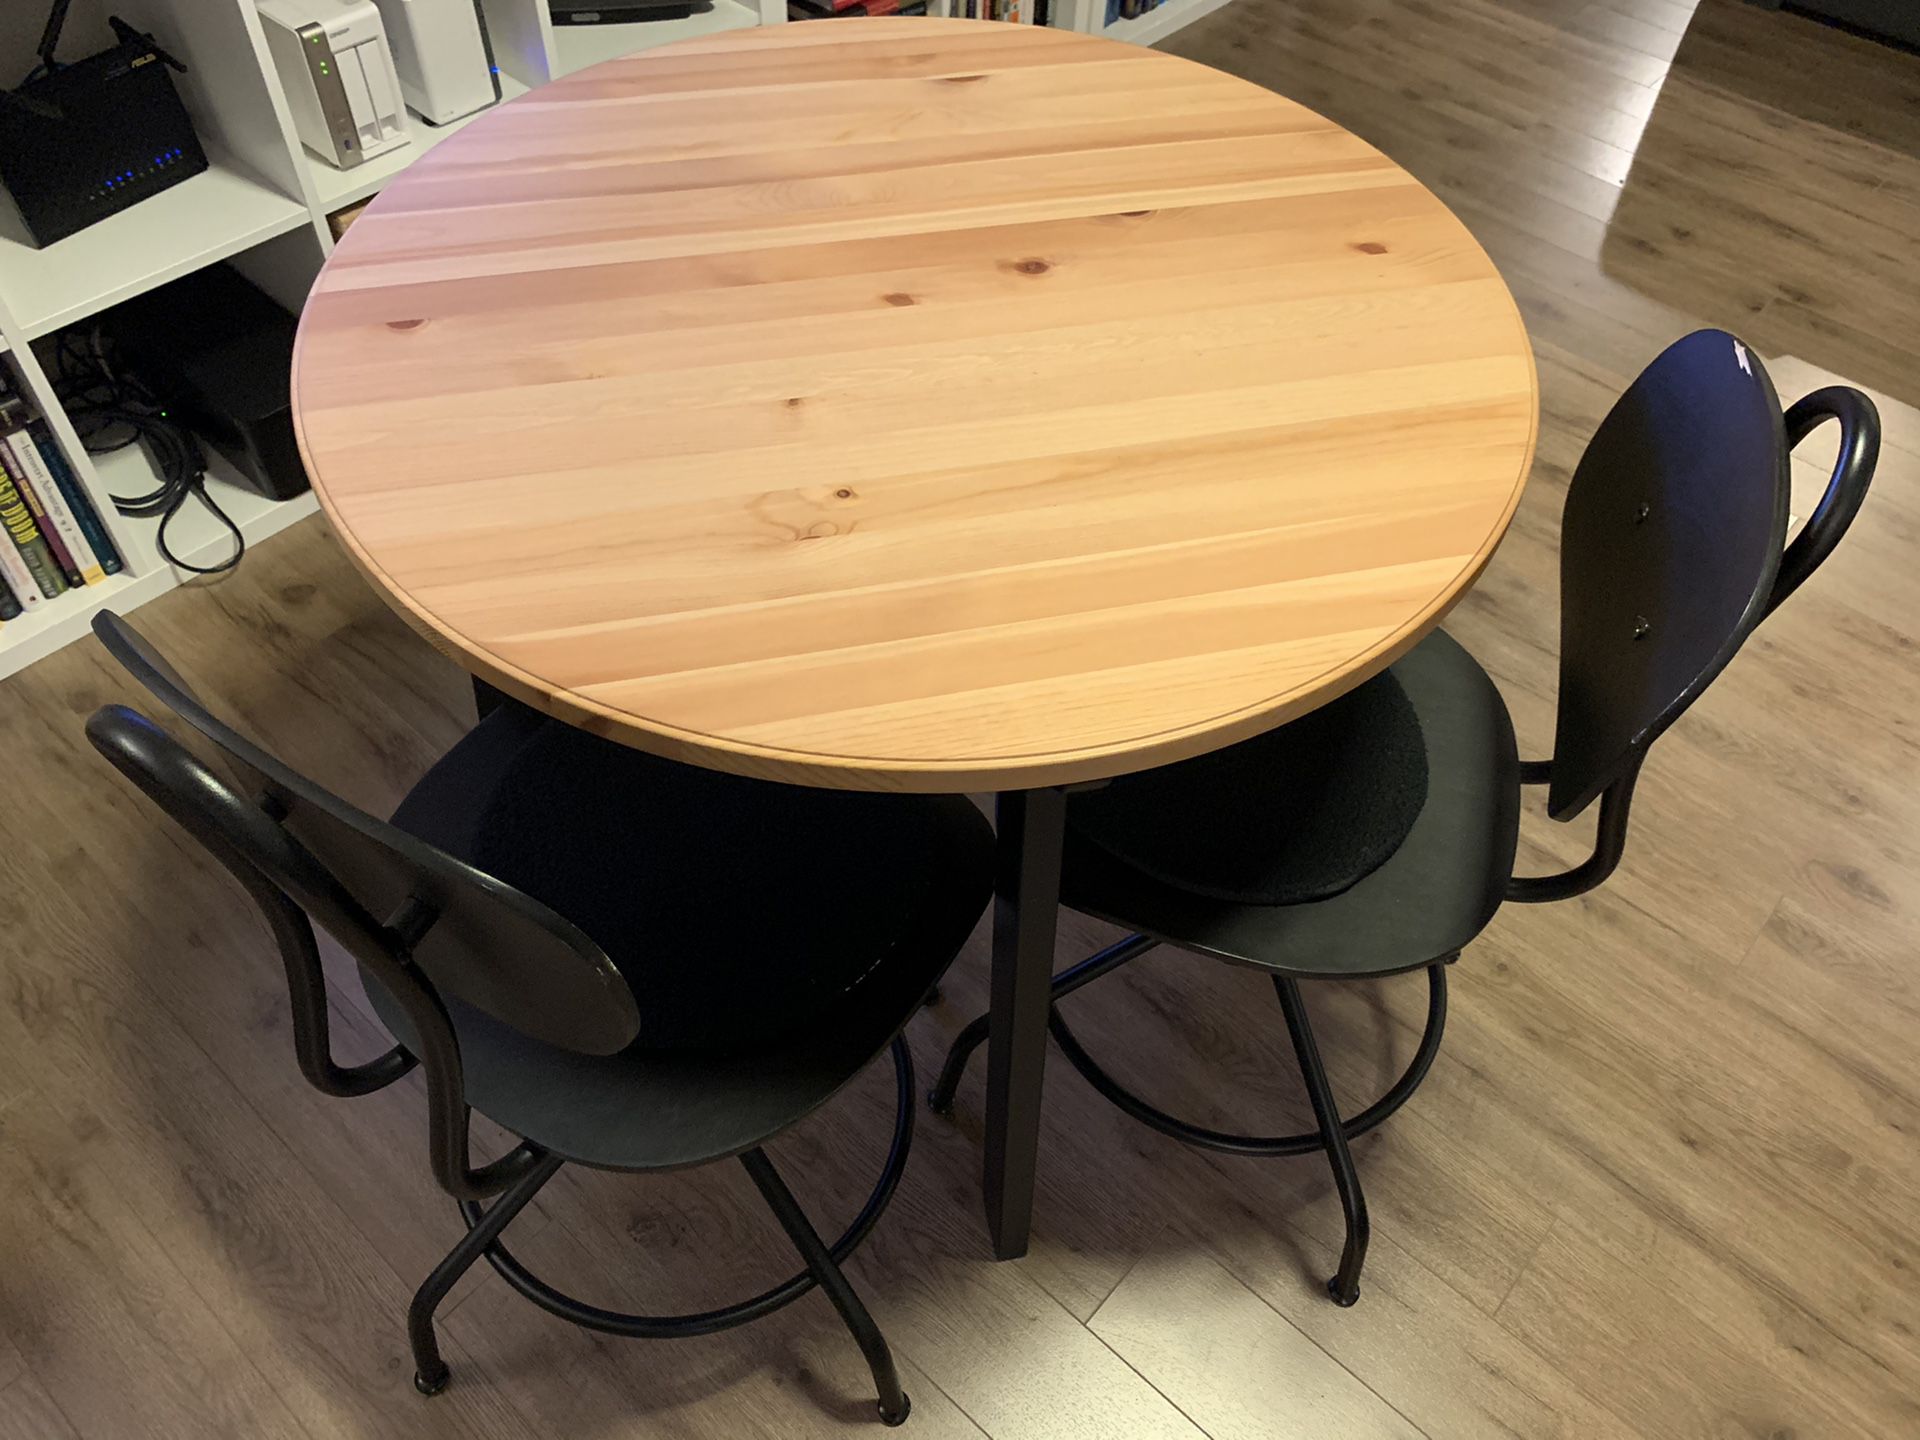 Breakfast table - 2 chairs - 30$